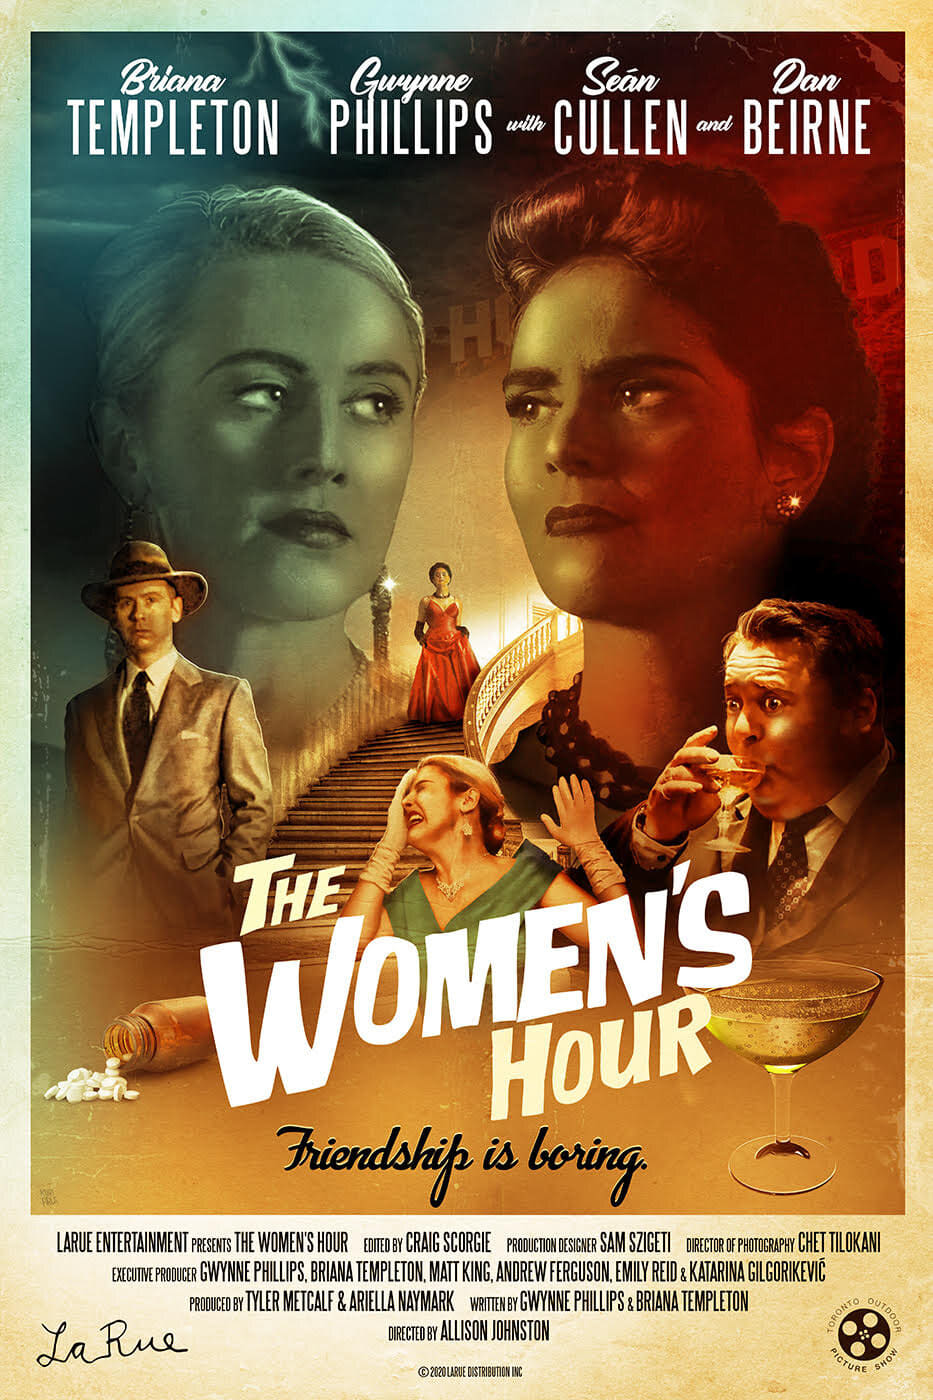 The Women's Hour